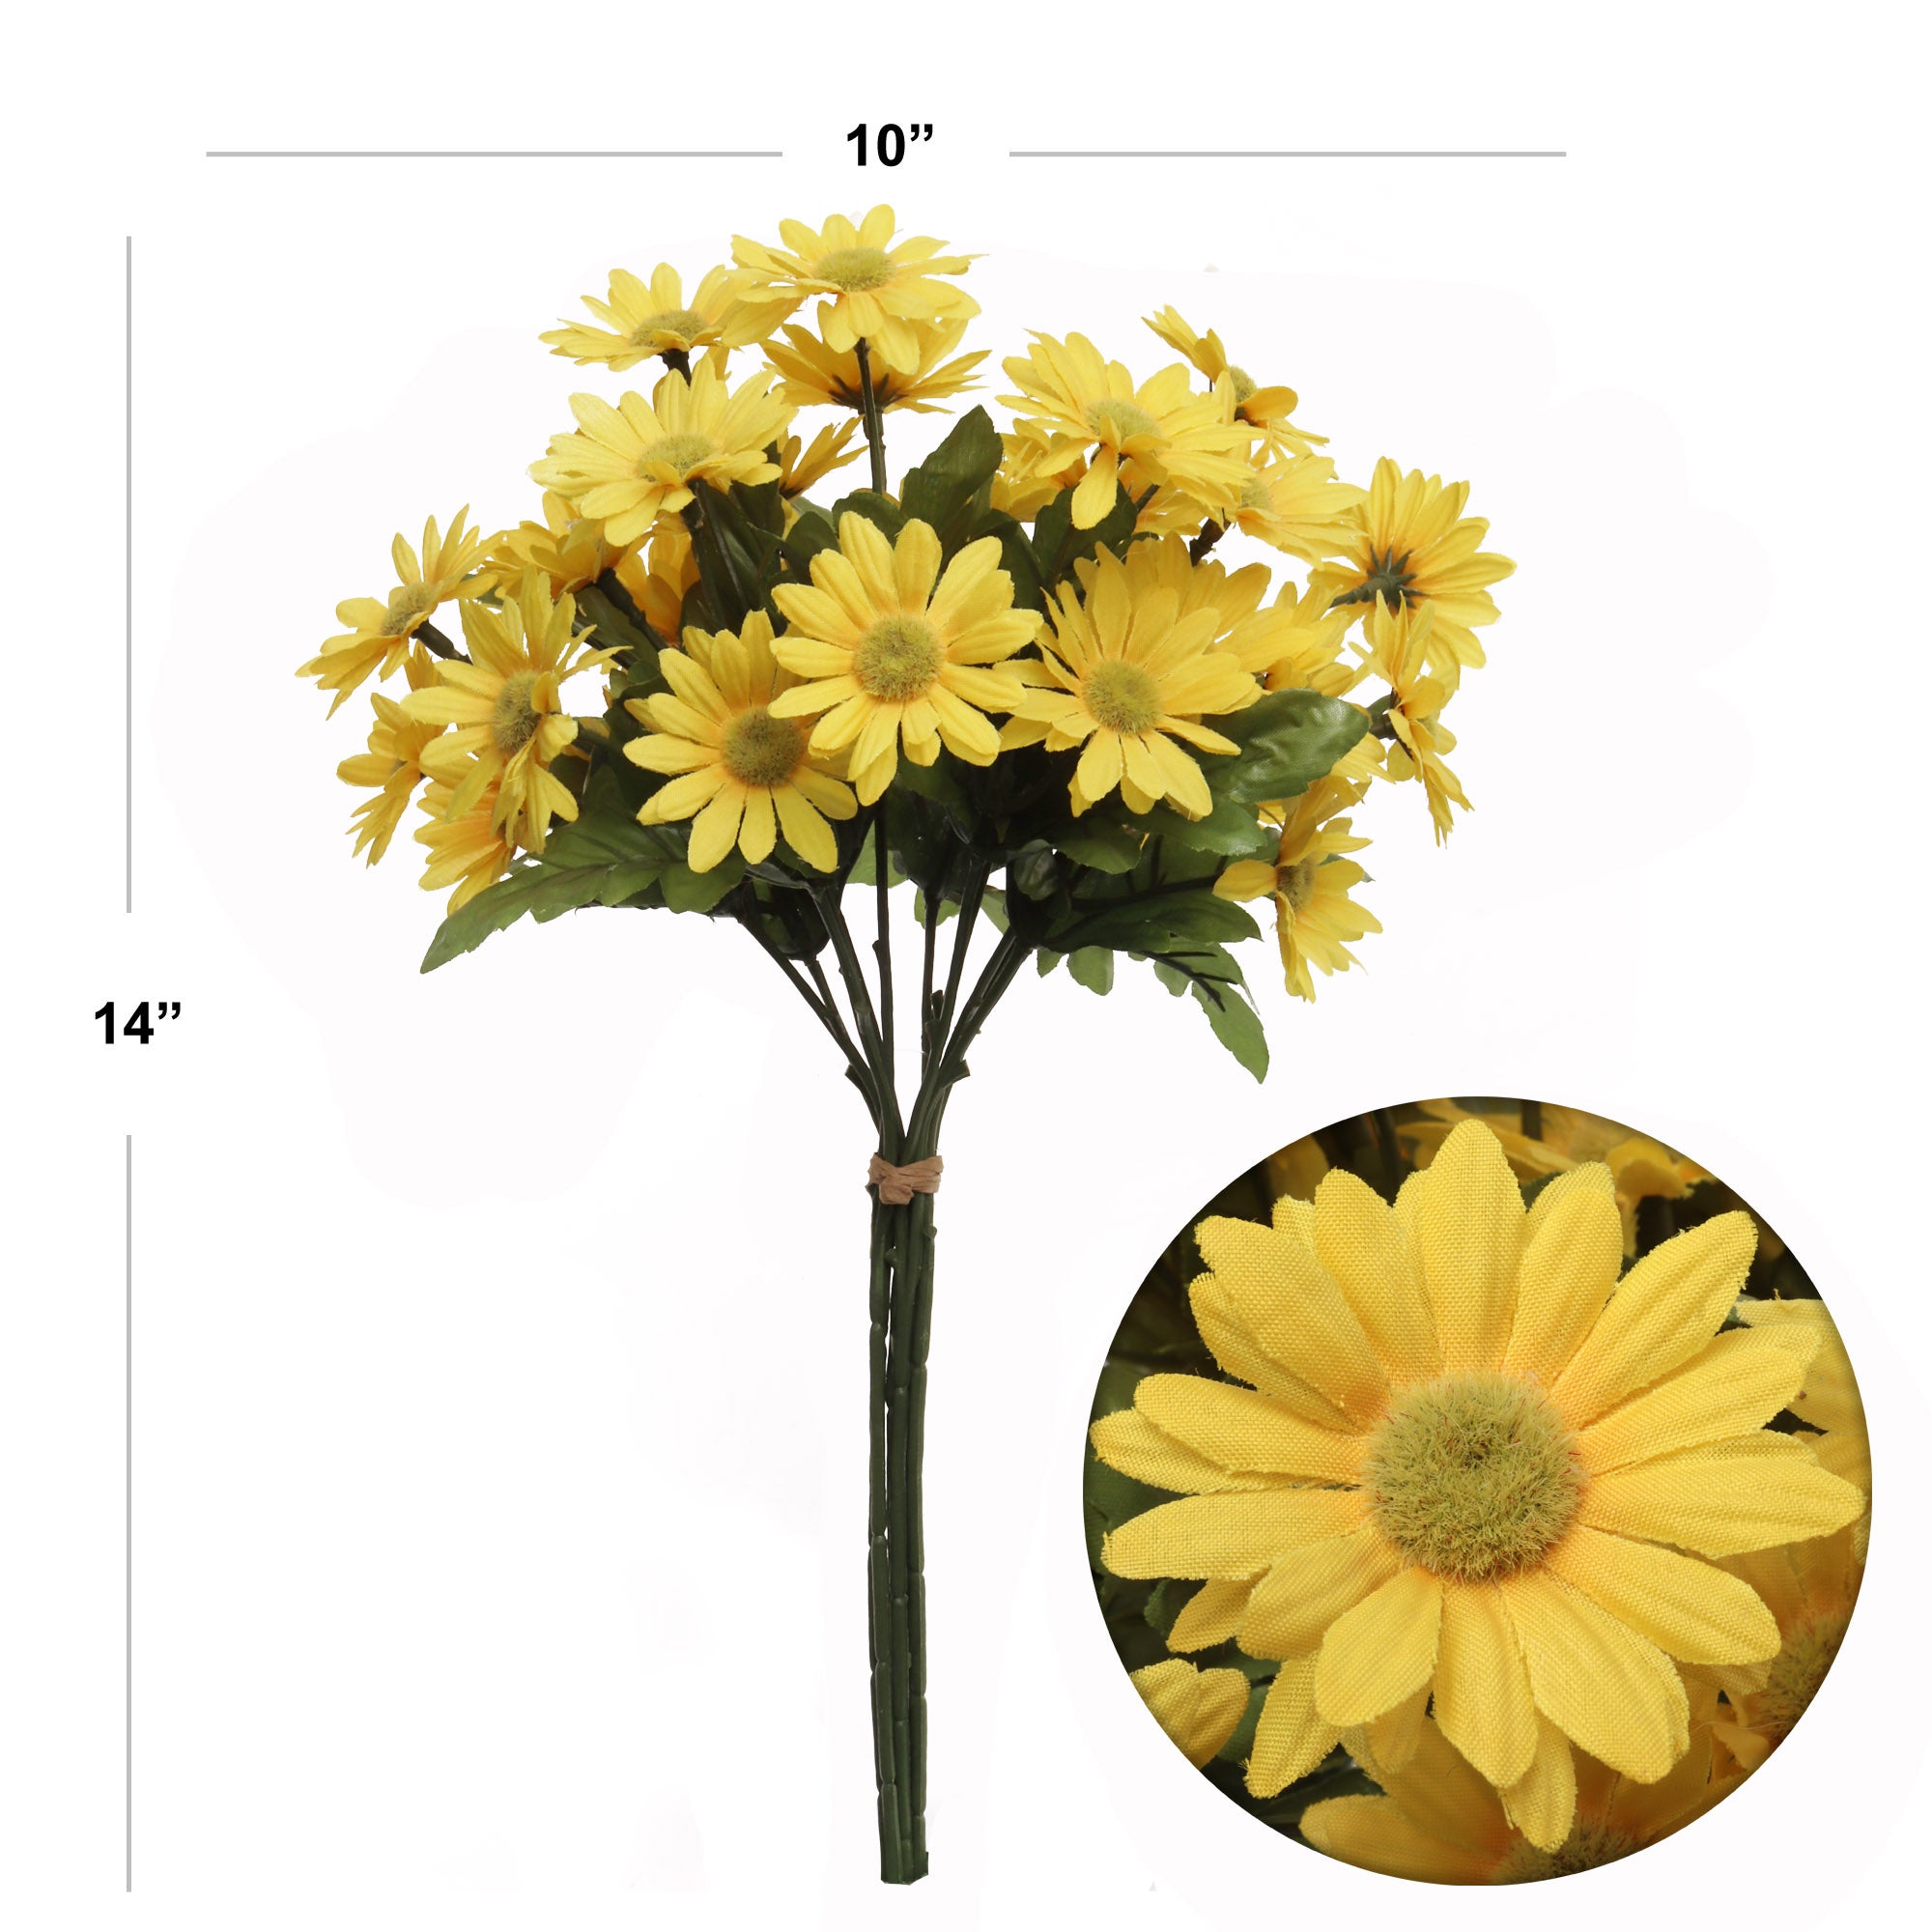 Cheerful 14" Yellow Daisy Bundle - Bright Faux Floral Accent for Home Décor, Bouquets & Sunny Centerpieces